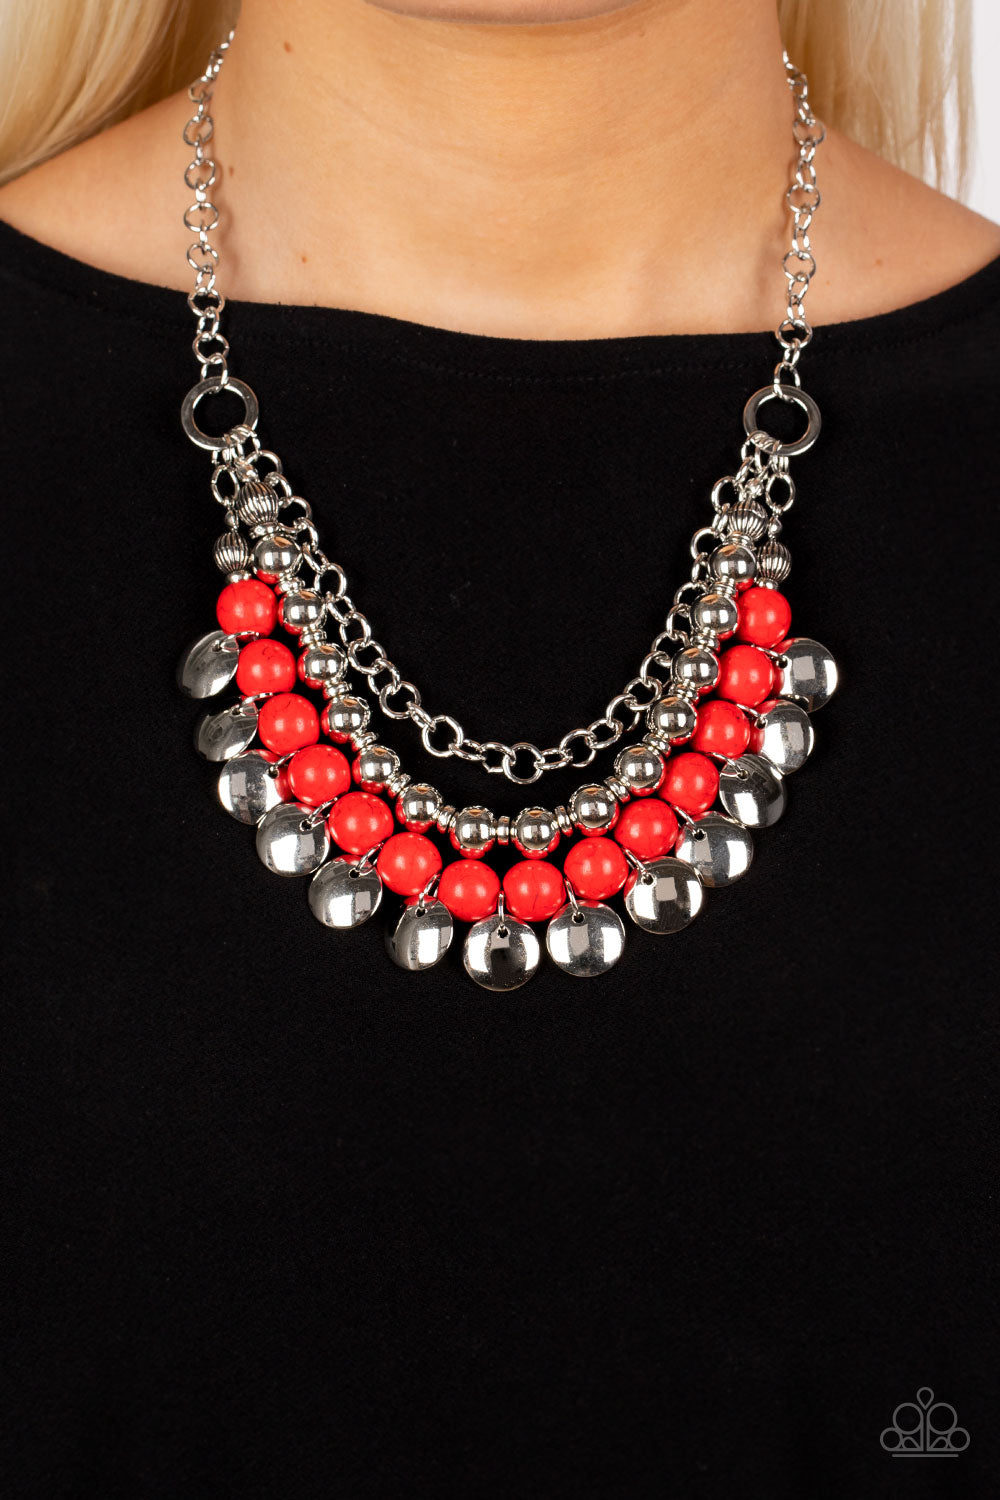 Leave Her Wild - Red Necklace  - Paparazzi Accessories - Alies Bling Bar